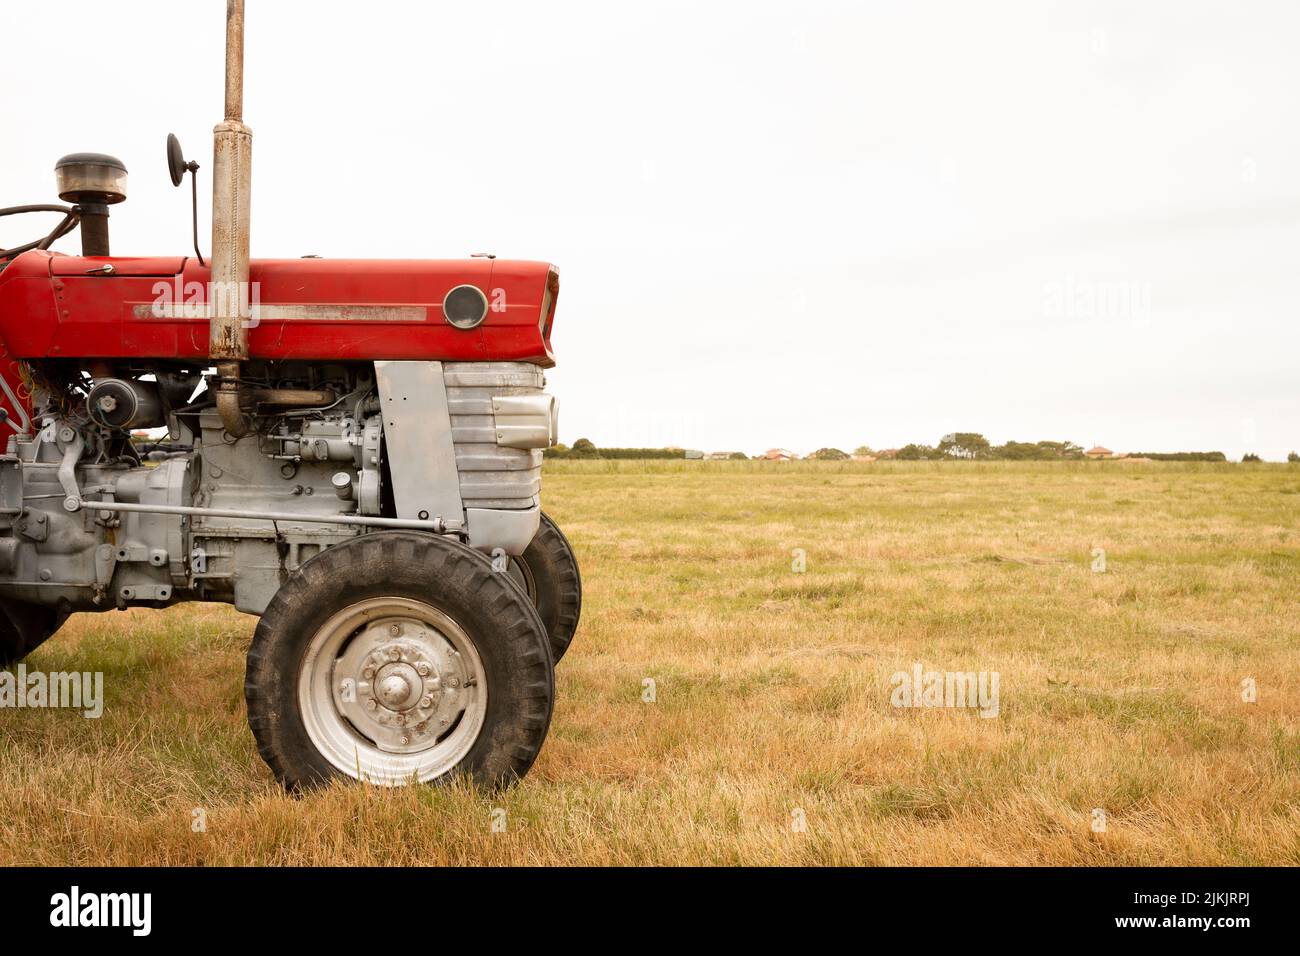 Detail of the front of a tractor standing in a crop field. The day is cloudy. Concept of agriculture and rural life. Space for text. Stock Photo